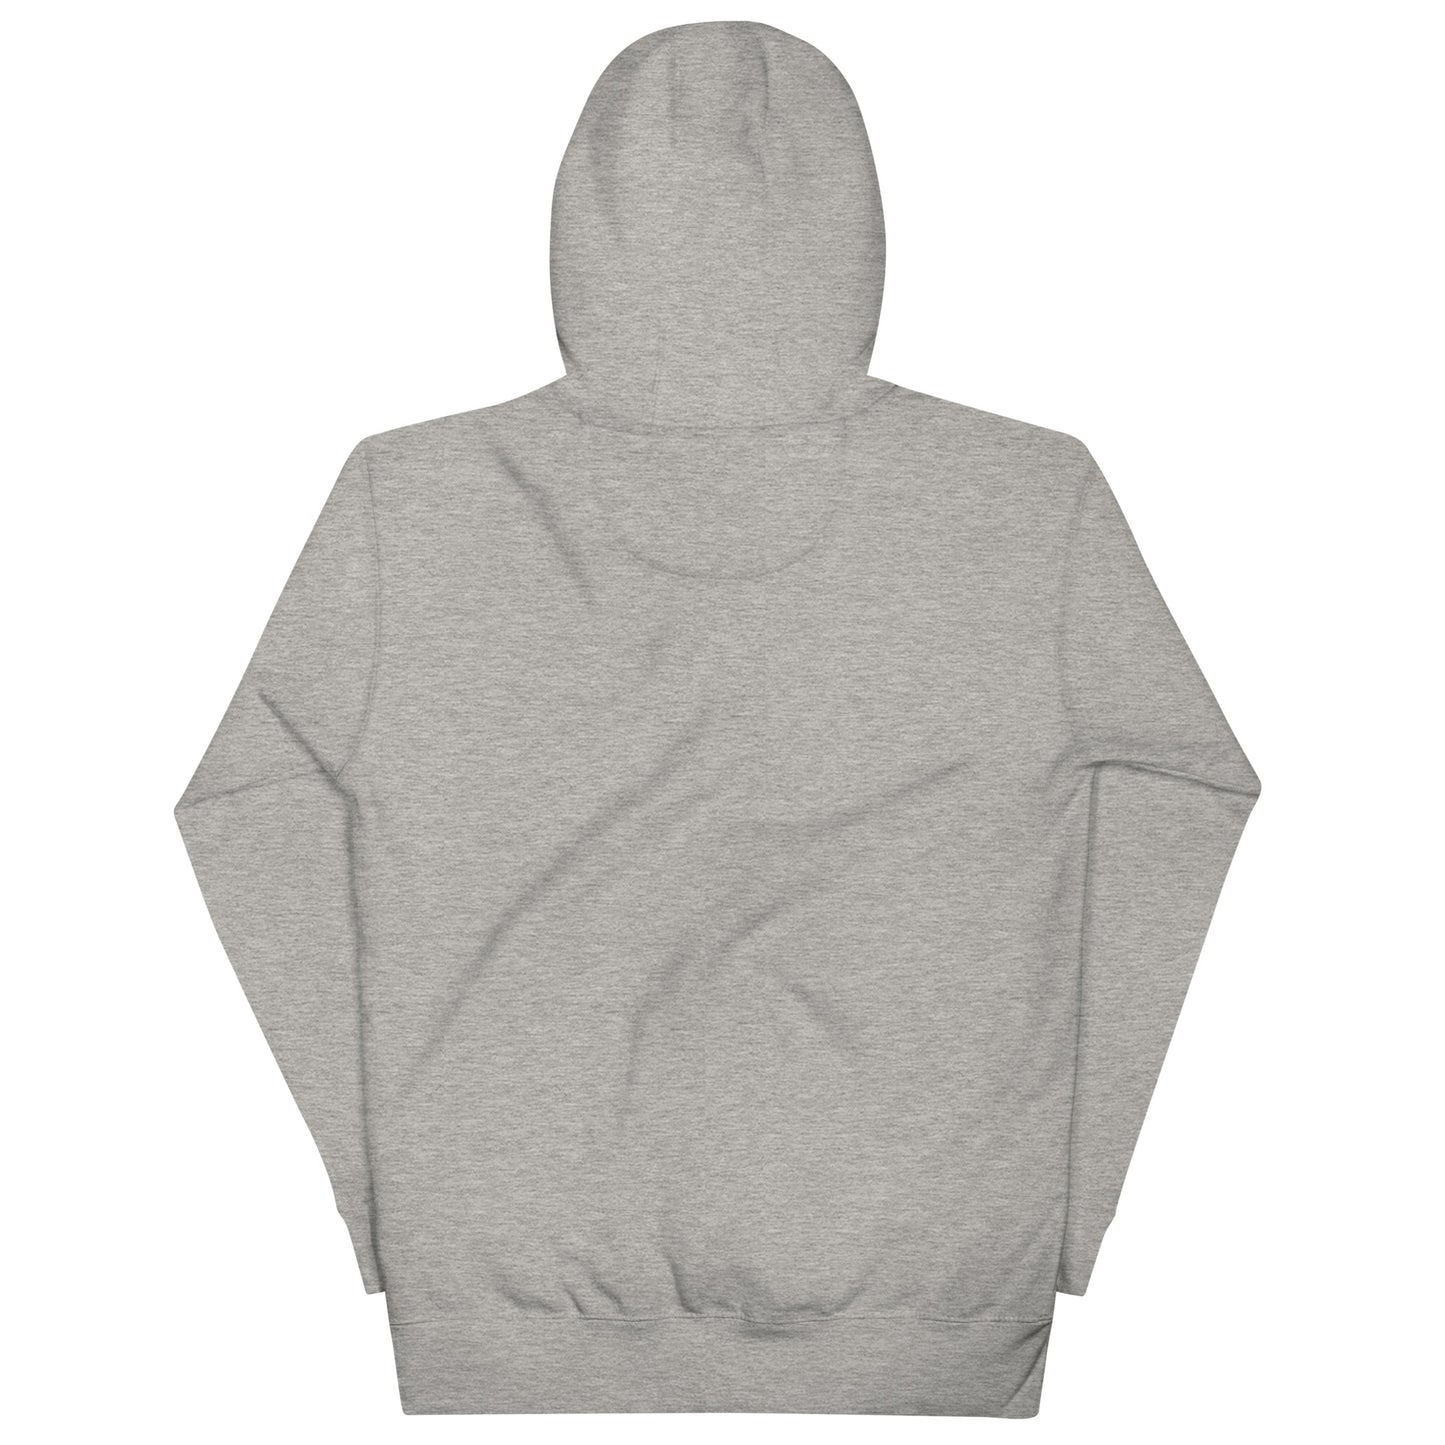 back hoodie Logo gray by B.Different Clothing independent streetwear brand inspired by street art graffiti